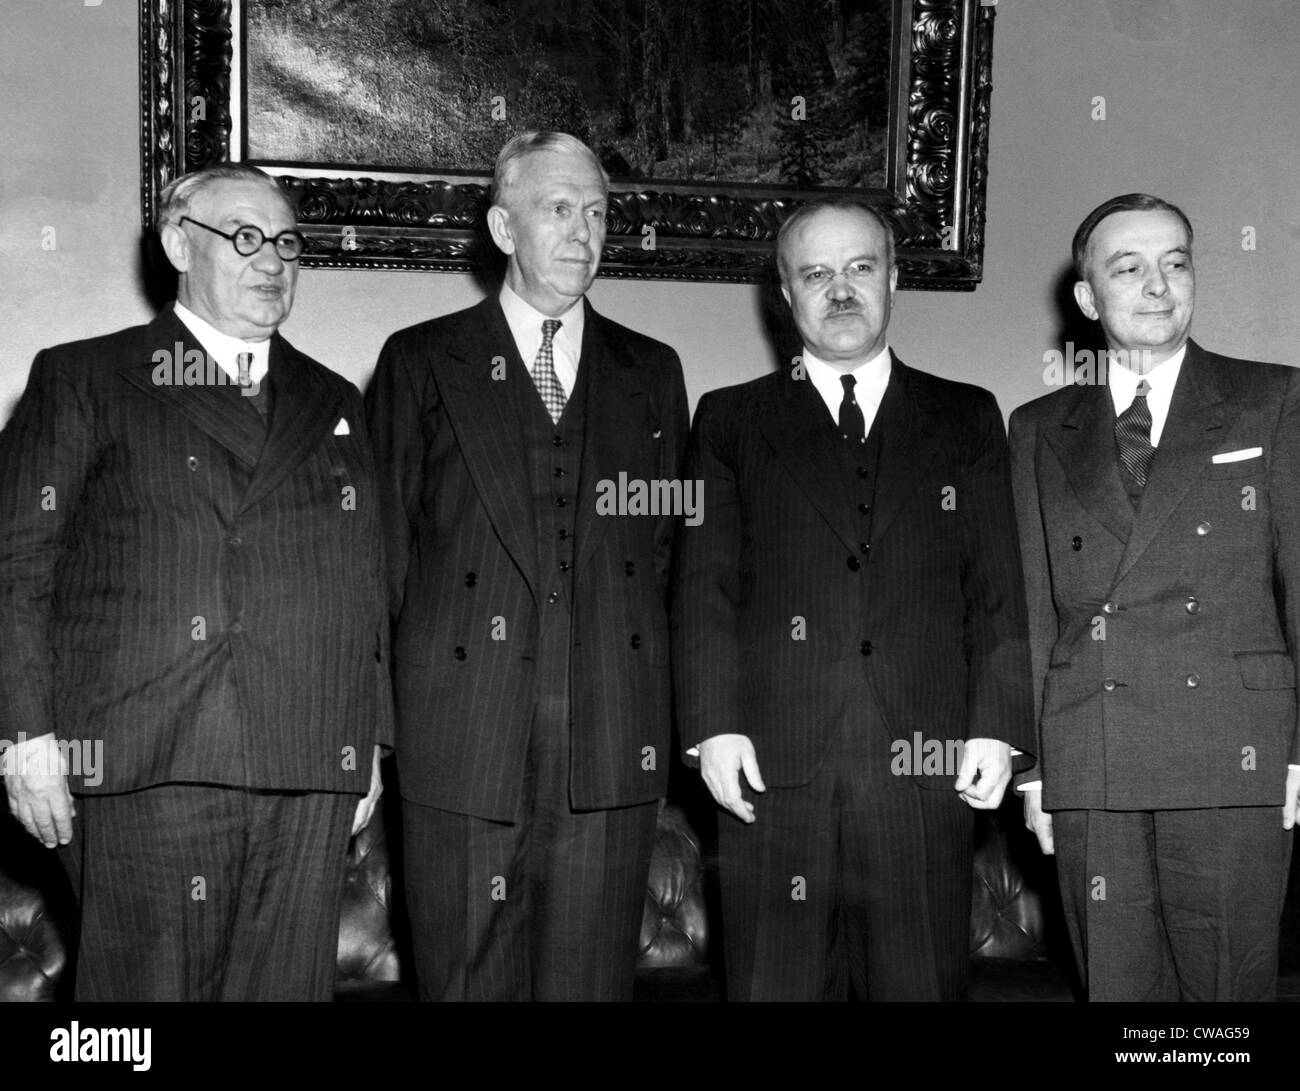 Ernest bevin 1940s Black and White Stock Photos & Images - Alamy